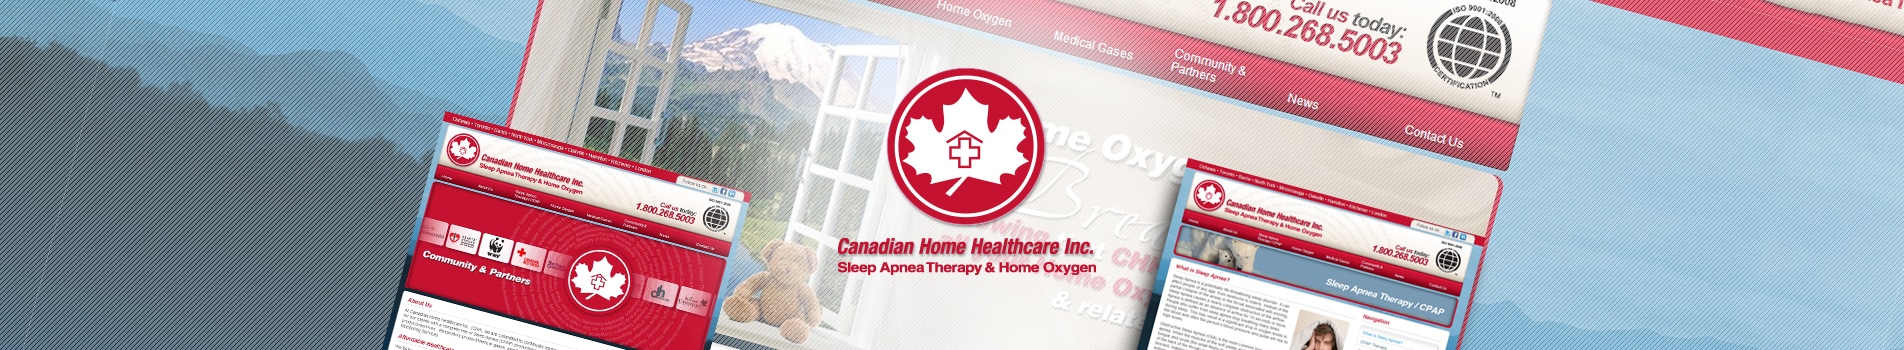 Canadian Home Healthcare Featured Image